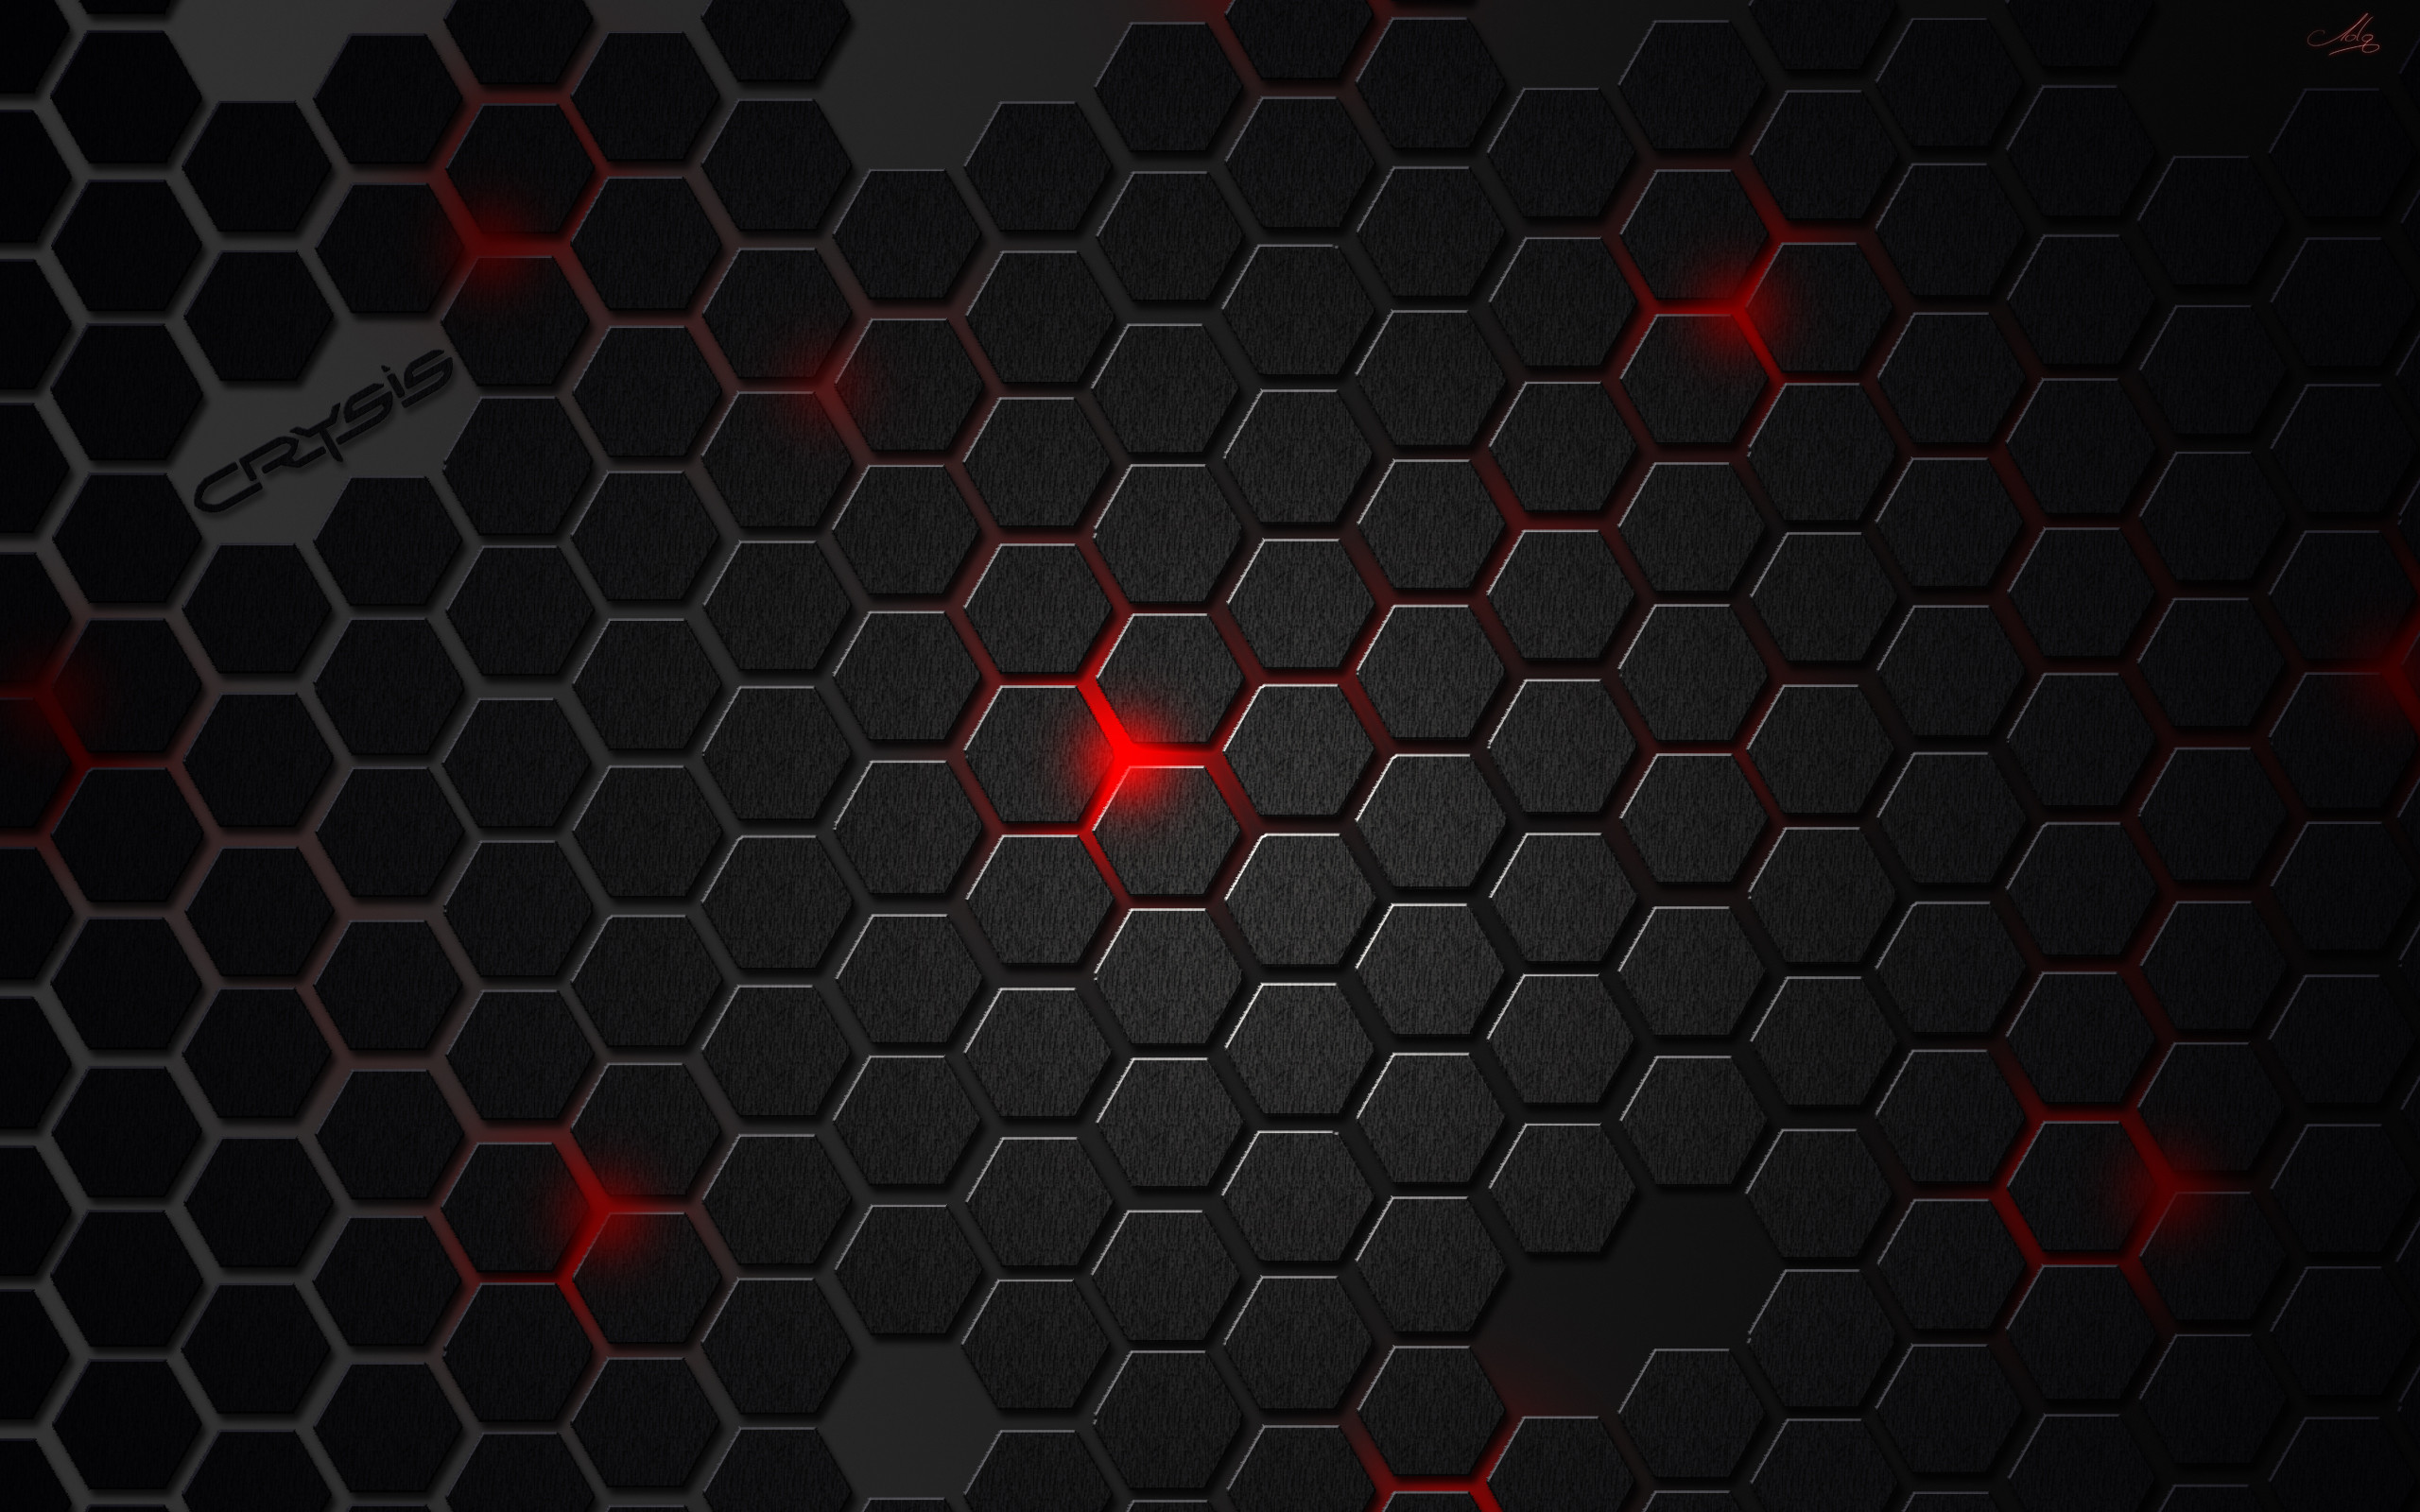 hd backgrounds red and black